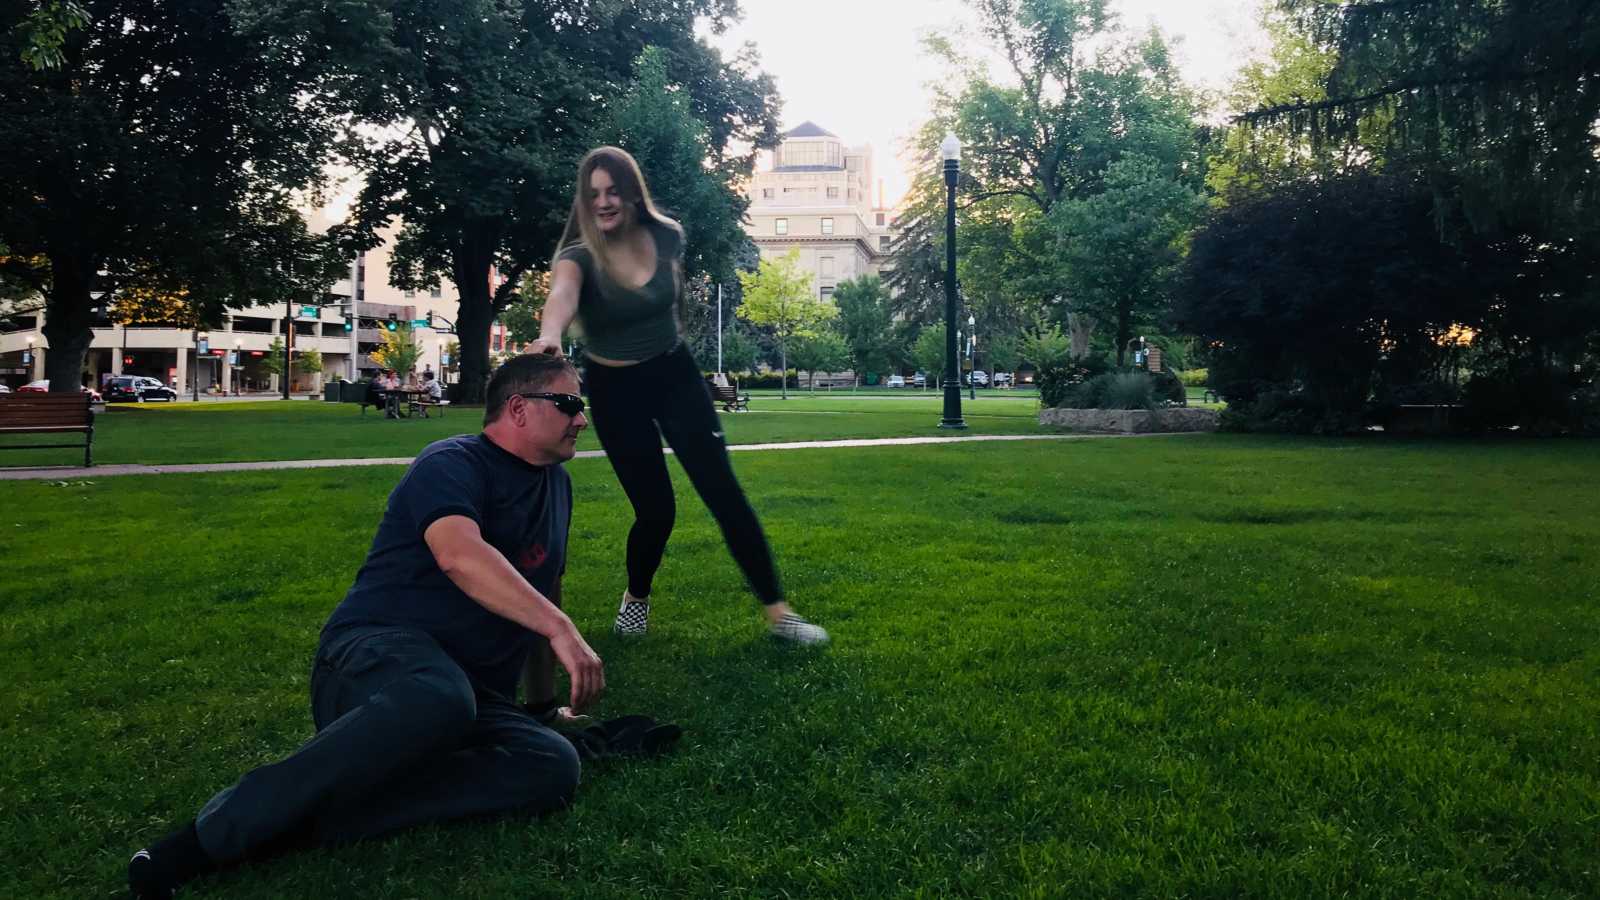 Father and daughter goof off while enjoying family time at a park together